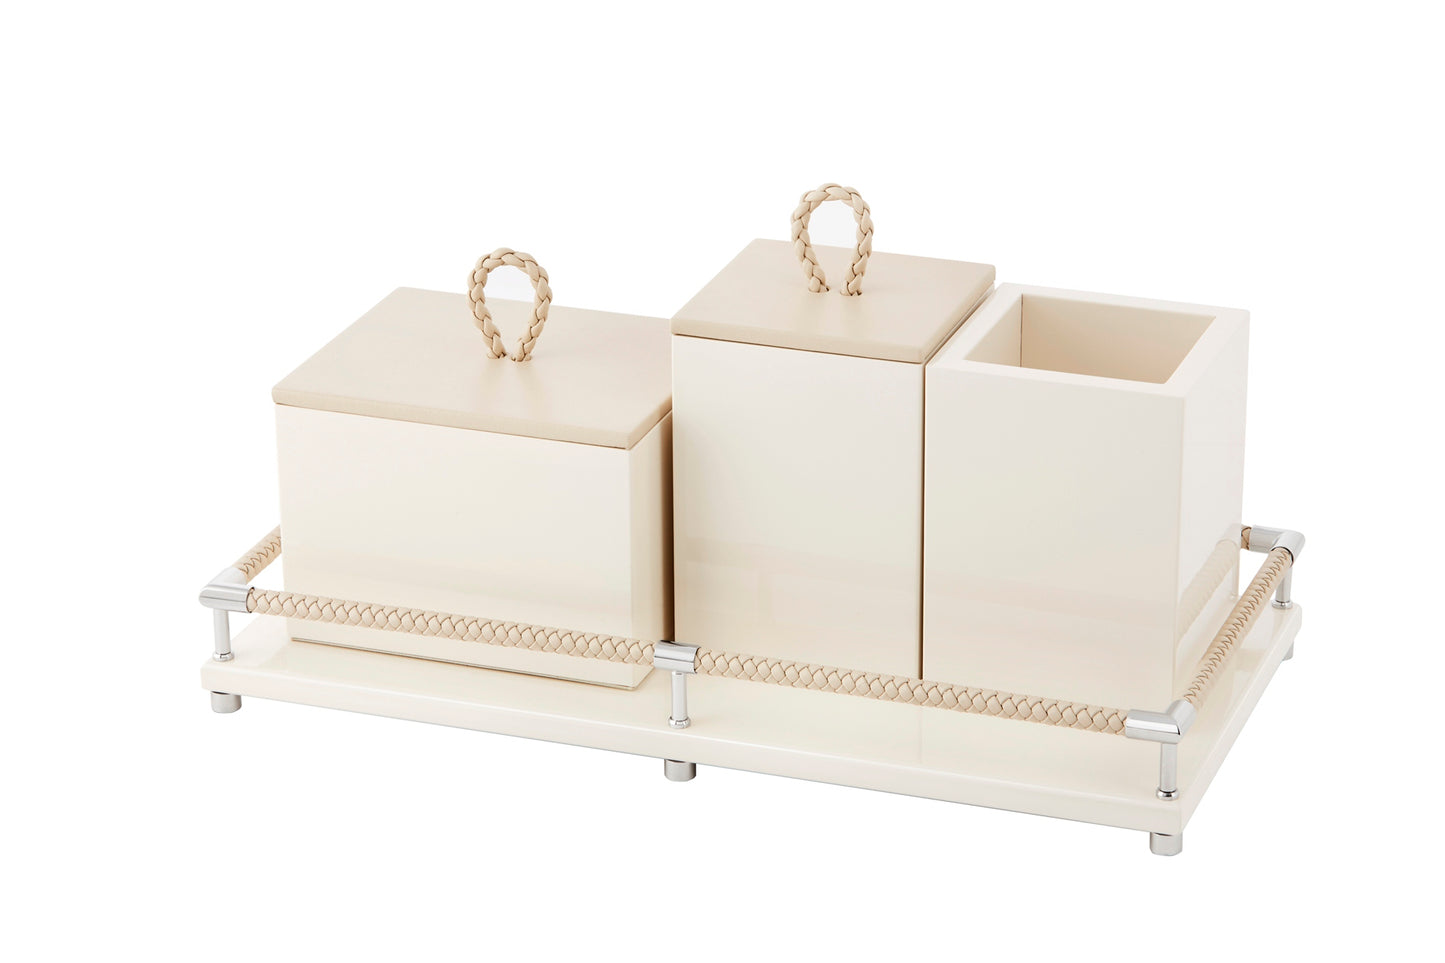 Riviere Thea Lacquered Wood Trinket Container Box with Leather Lid | Stylish Storage Solution | Elegant Design | Perfect for Storing Small Items | Ideal for Yacht Accessories Decor | Explore More Luxury Home Accessories at 2Jour Concierge, #1 luxury high-end gift & lifestyle shop